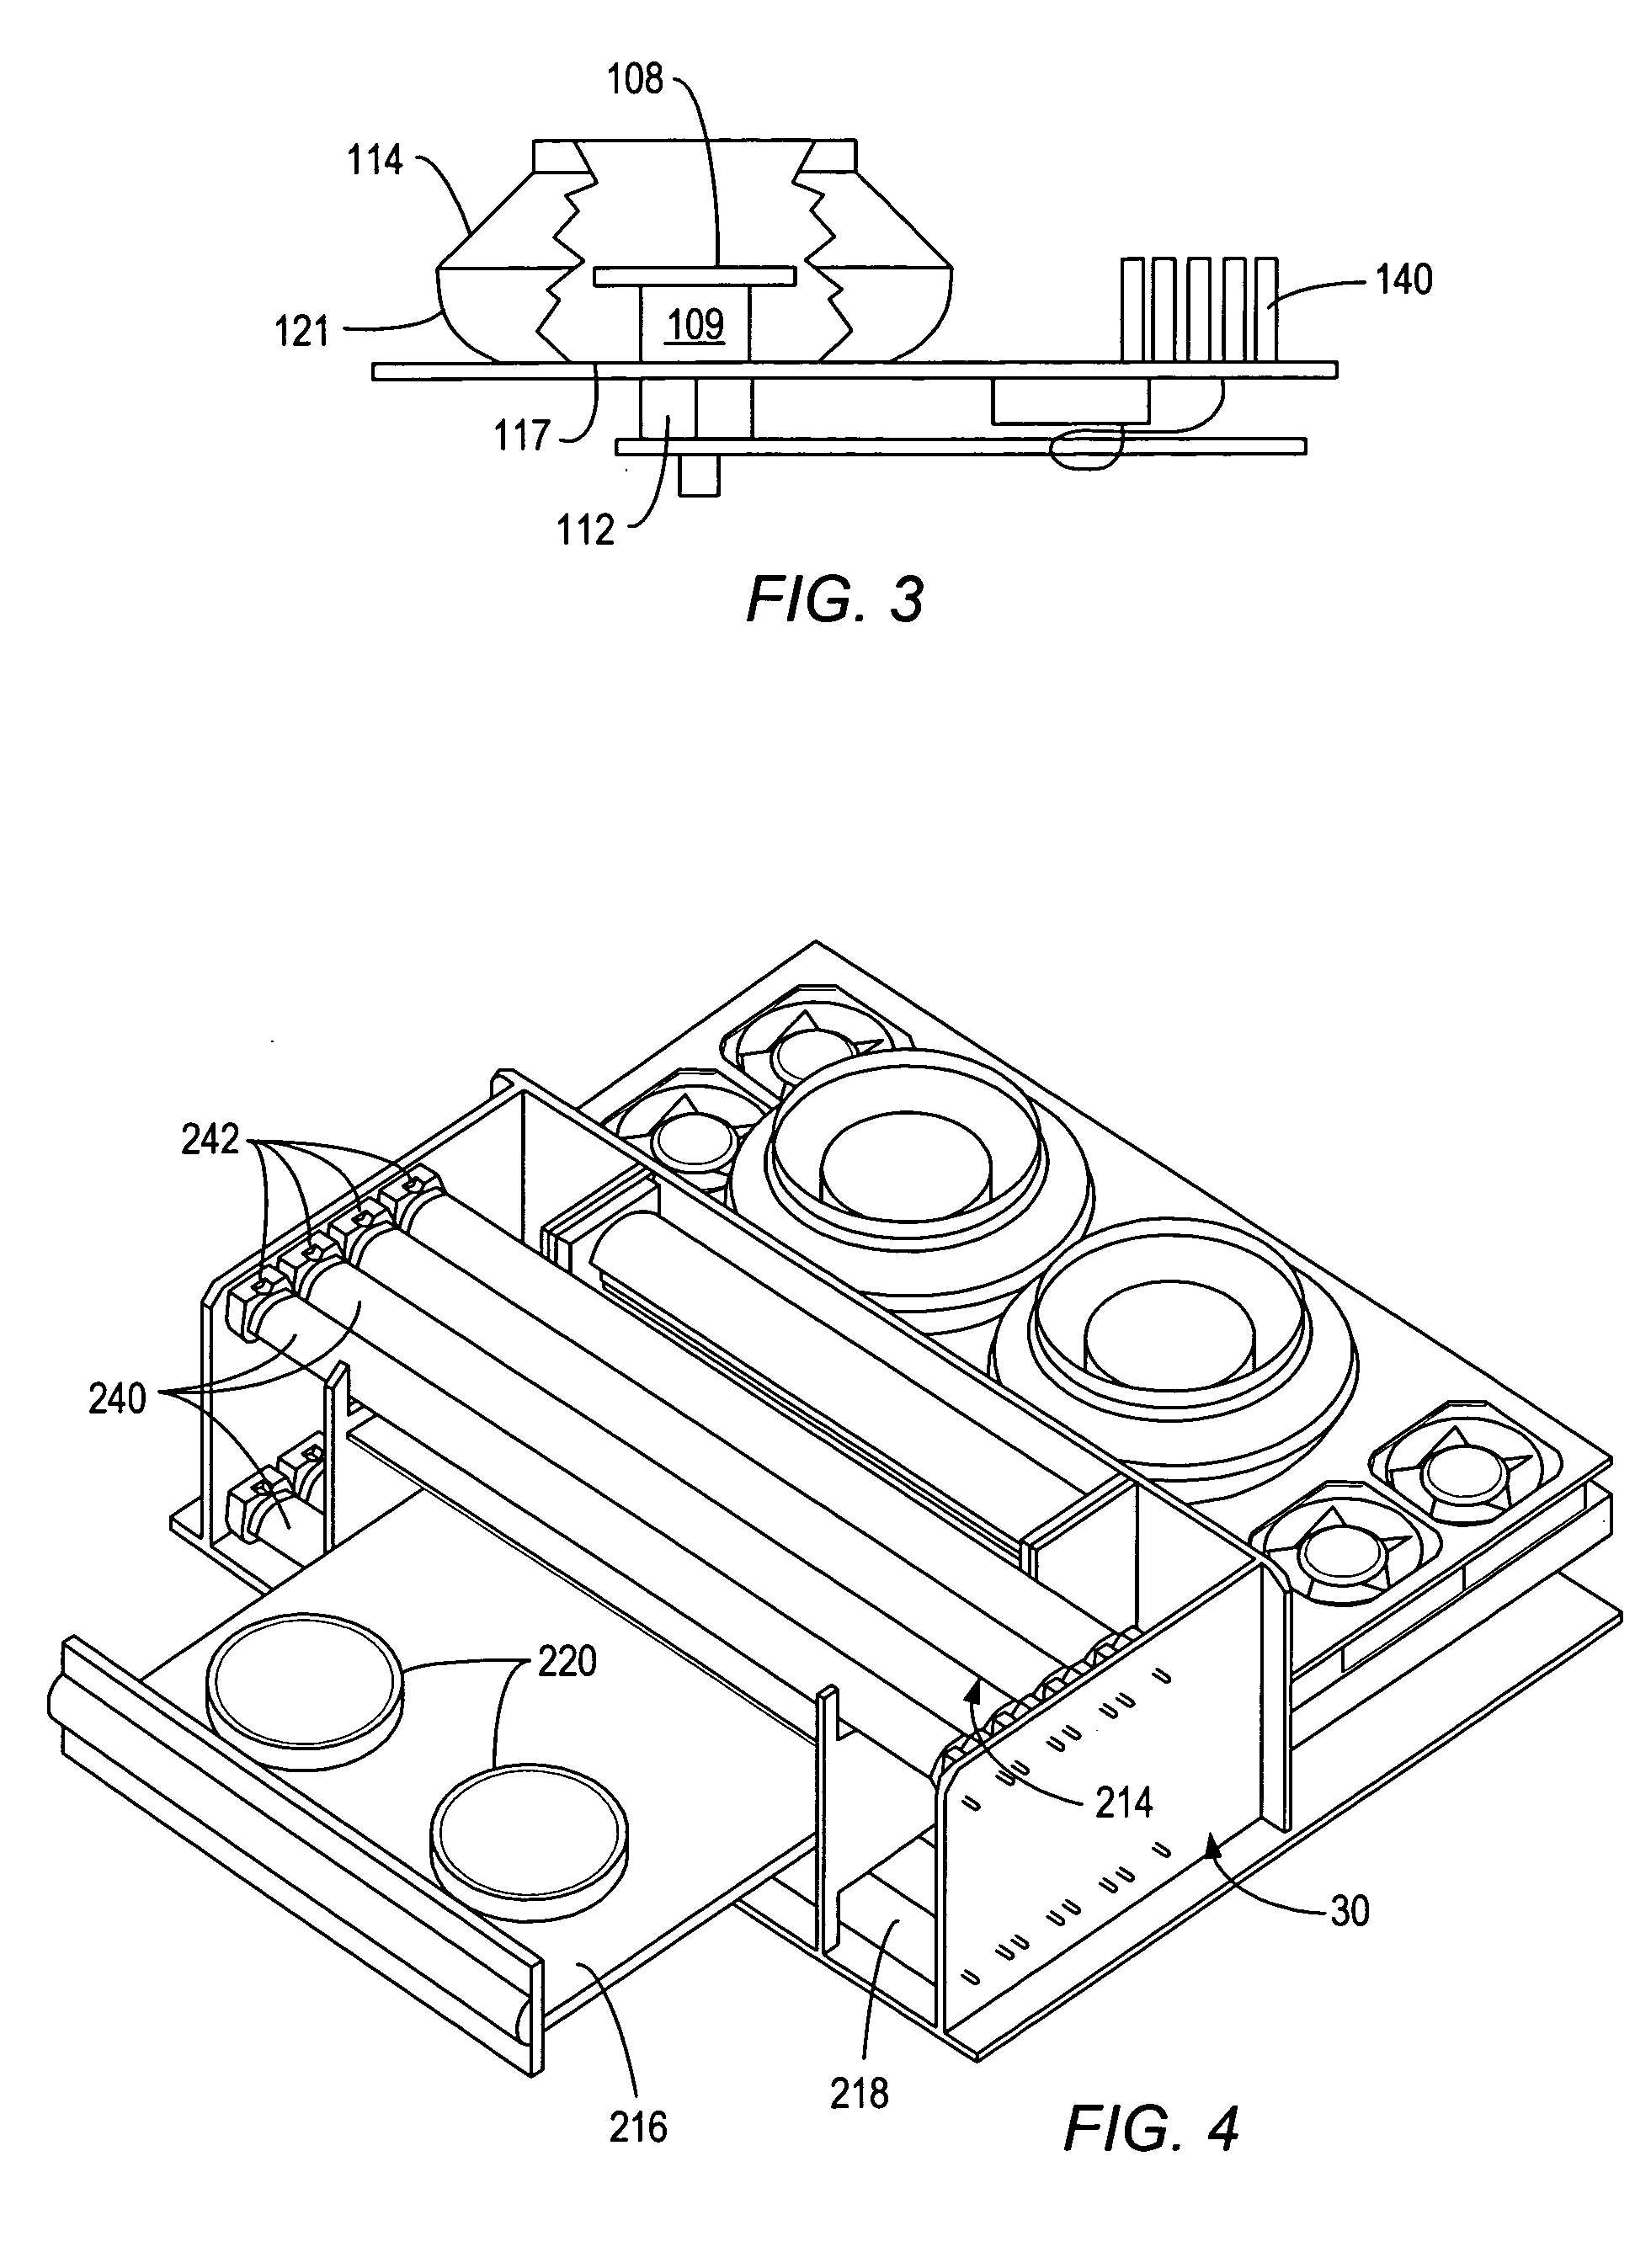 Methods and systems for coating eyeglass lens molds